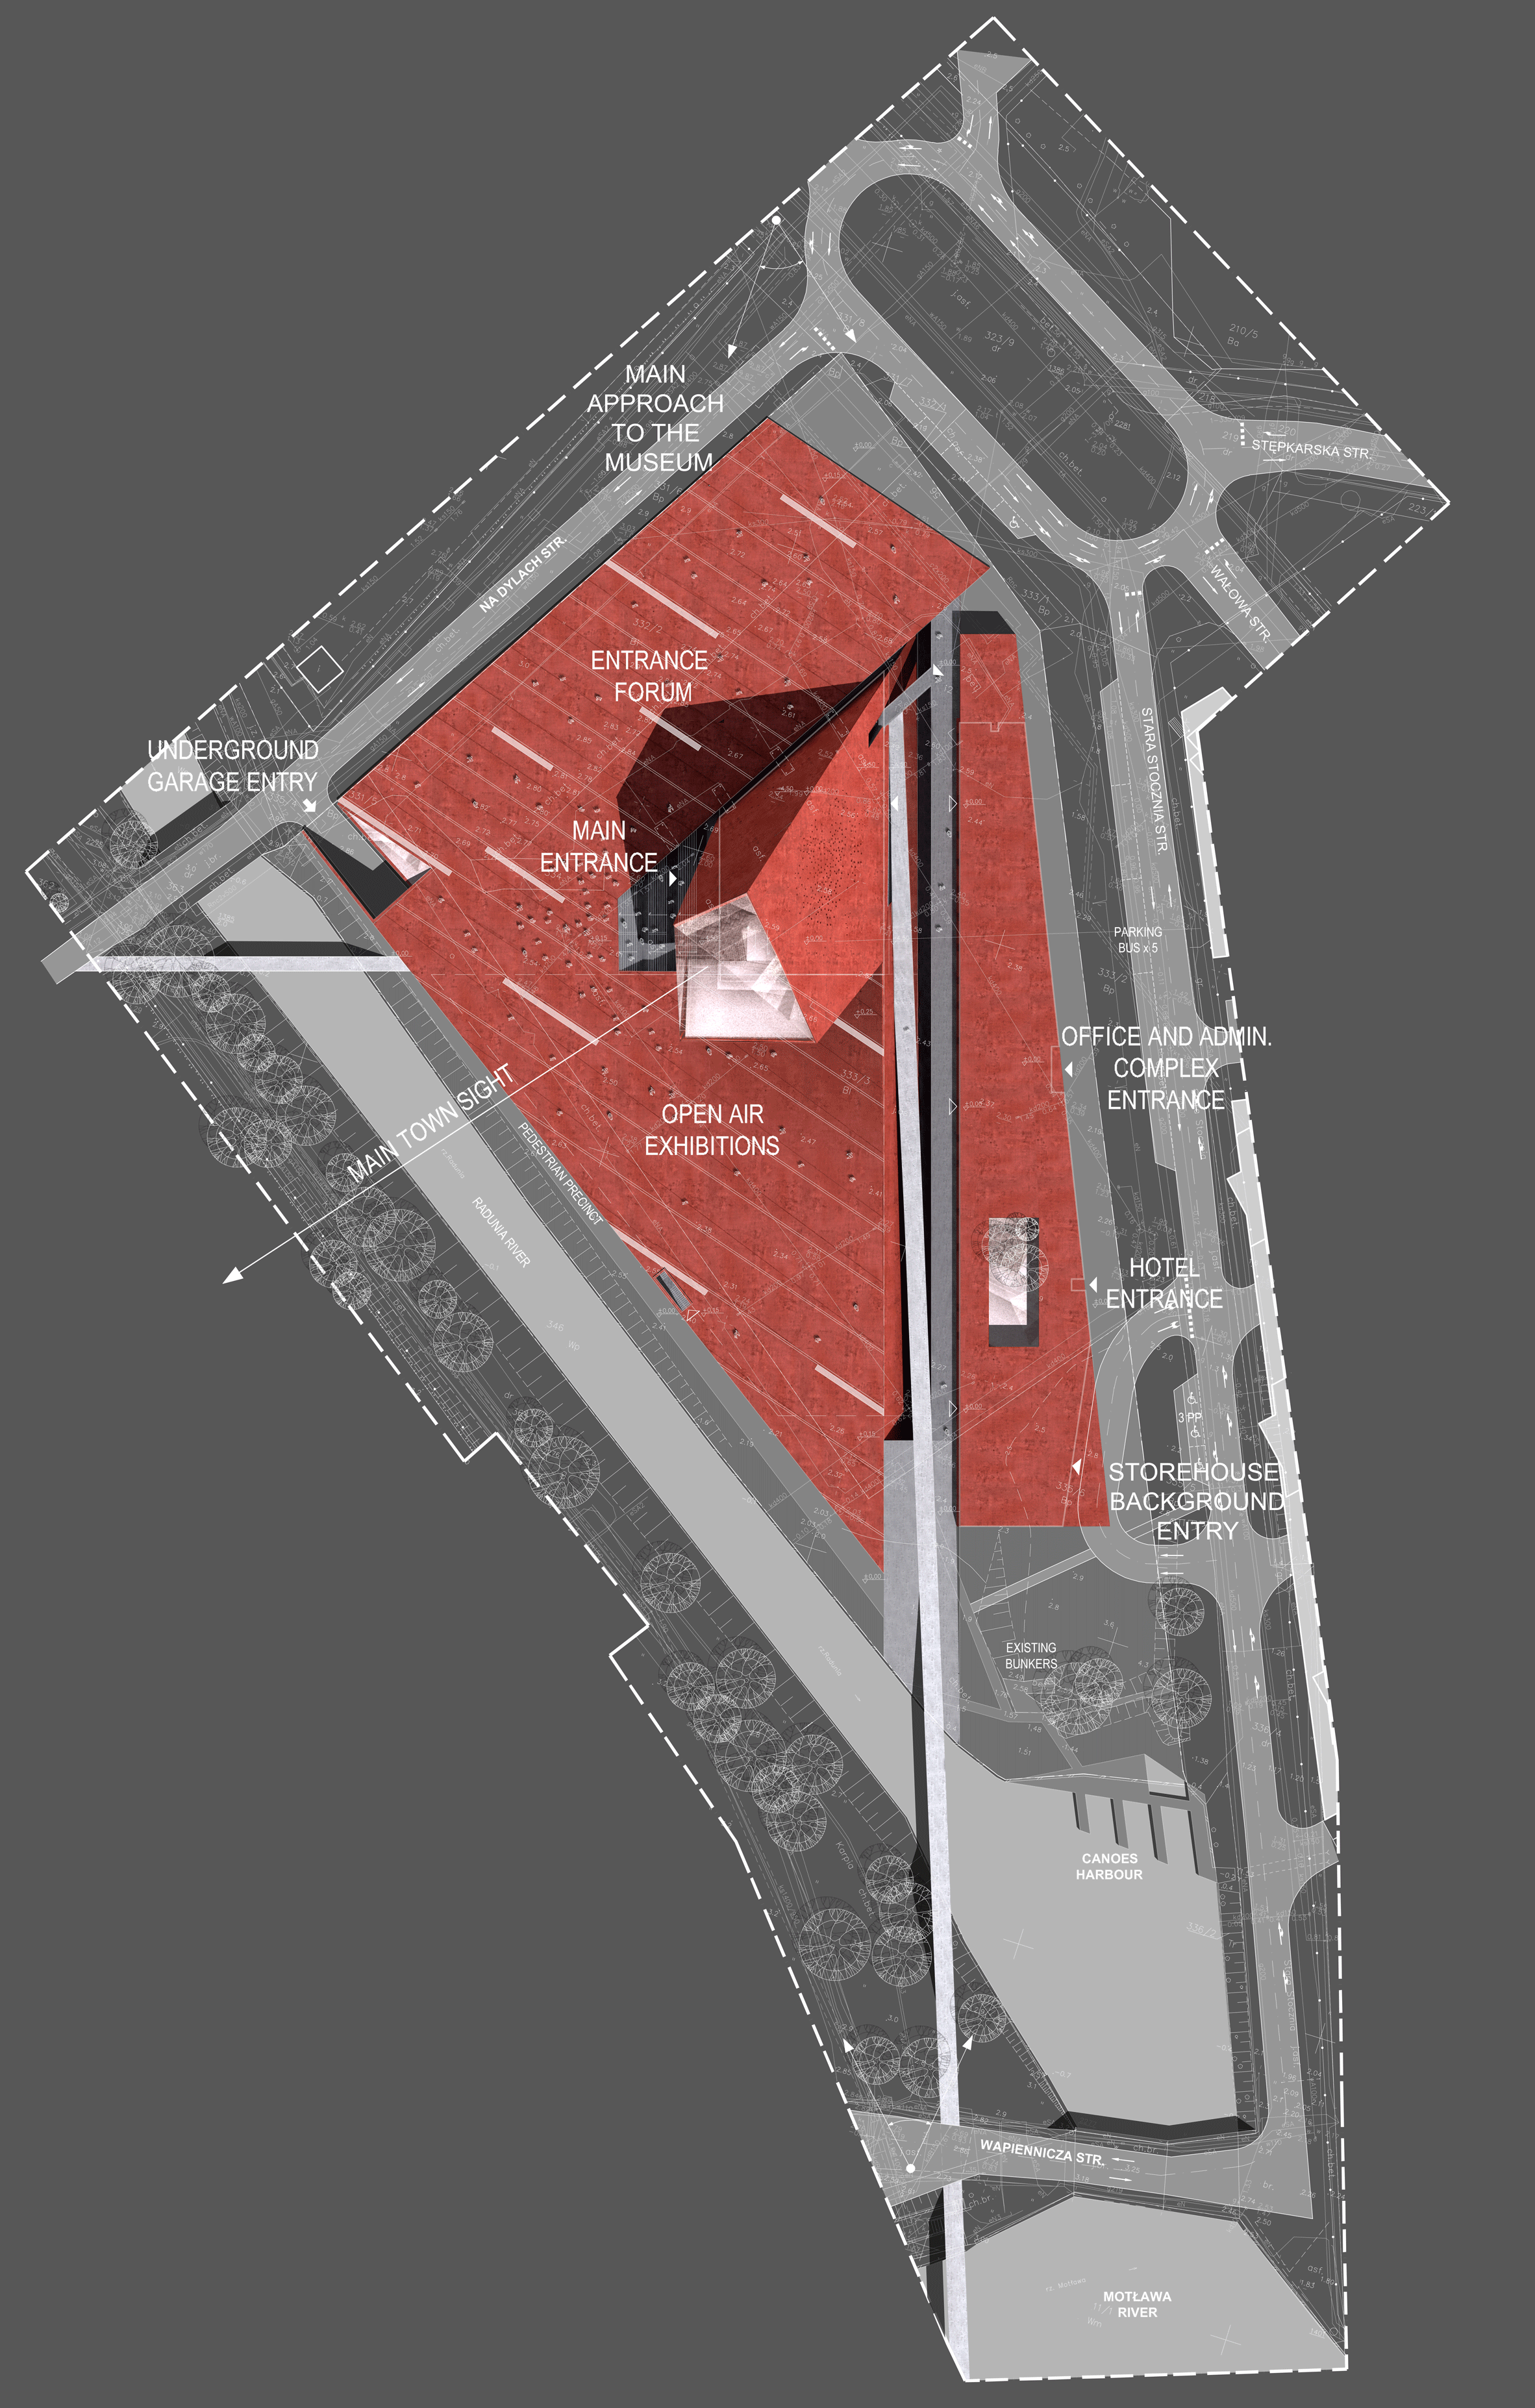 Tilted Red Tower Marks Entrance To Polish War Museum By Kwadrat